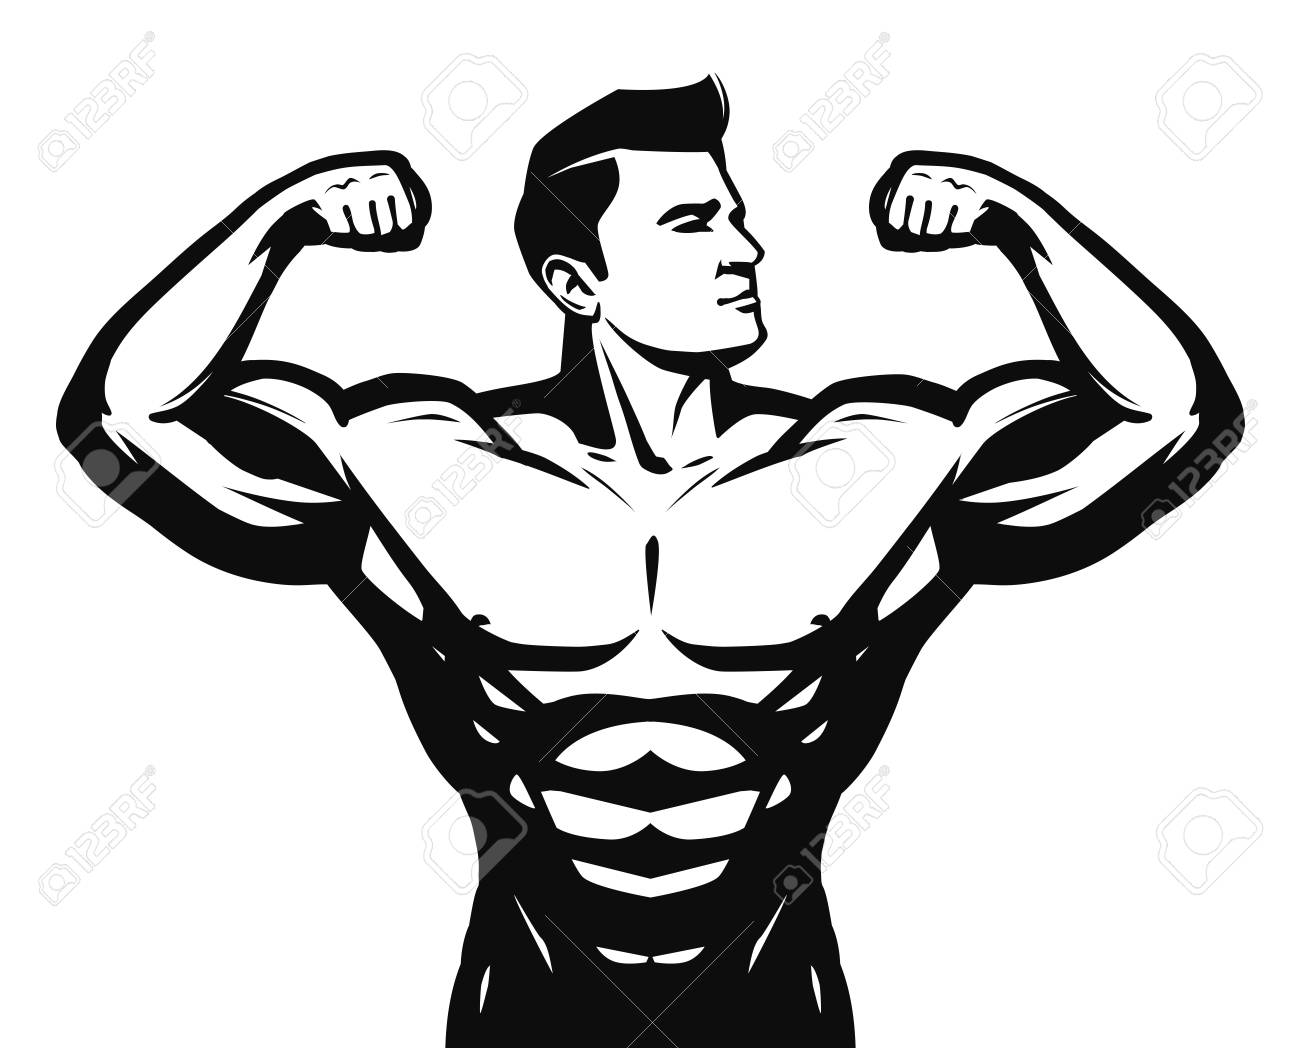 strong man clipart black and white 10 free Cliparts | Download images ...